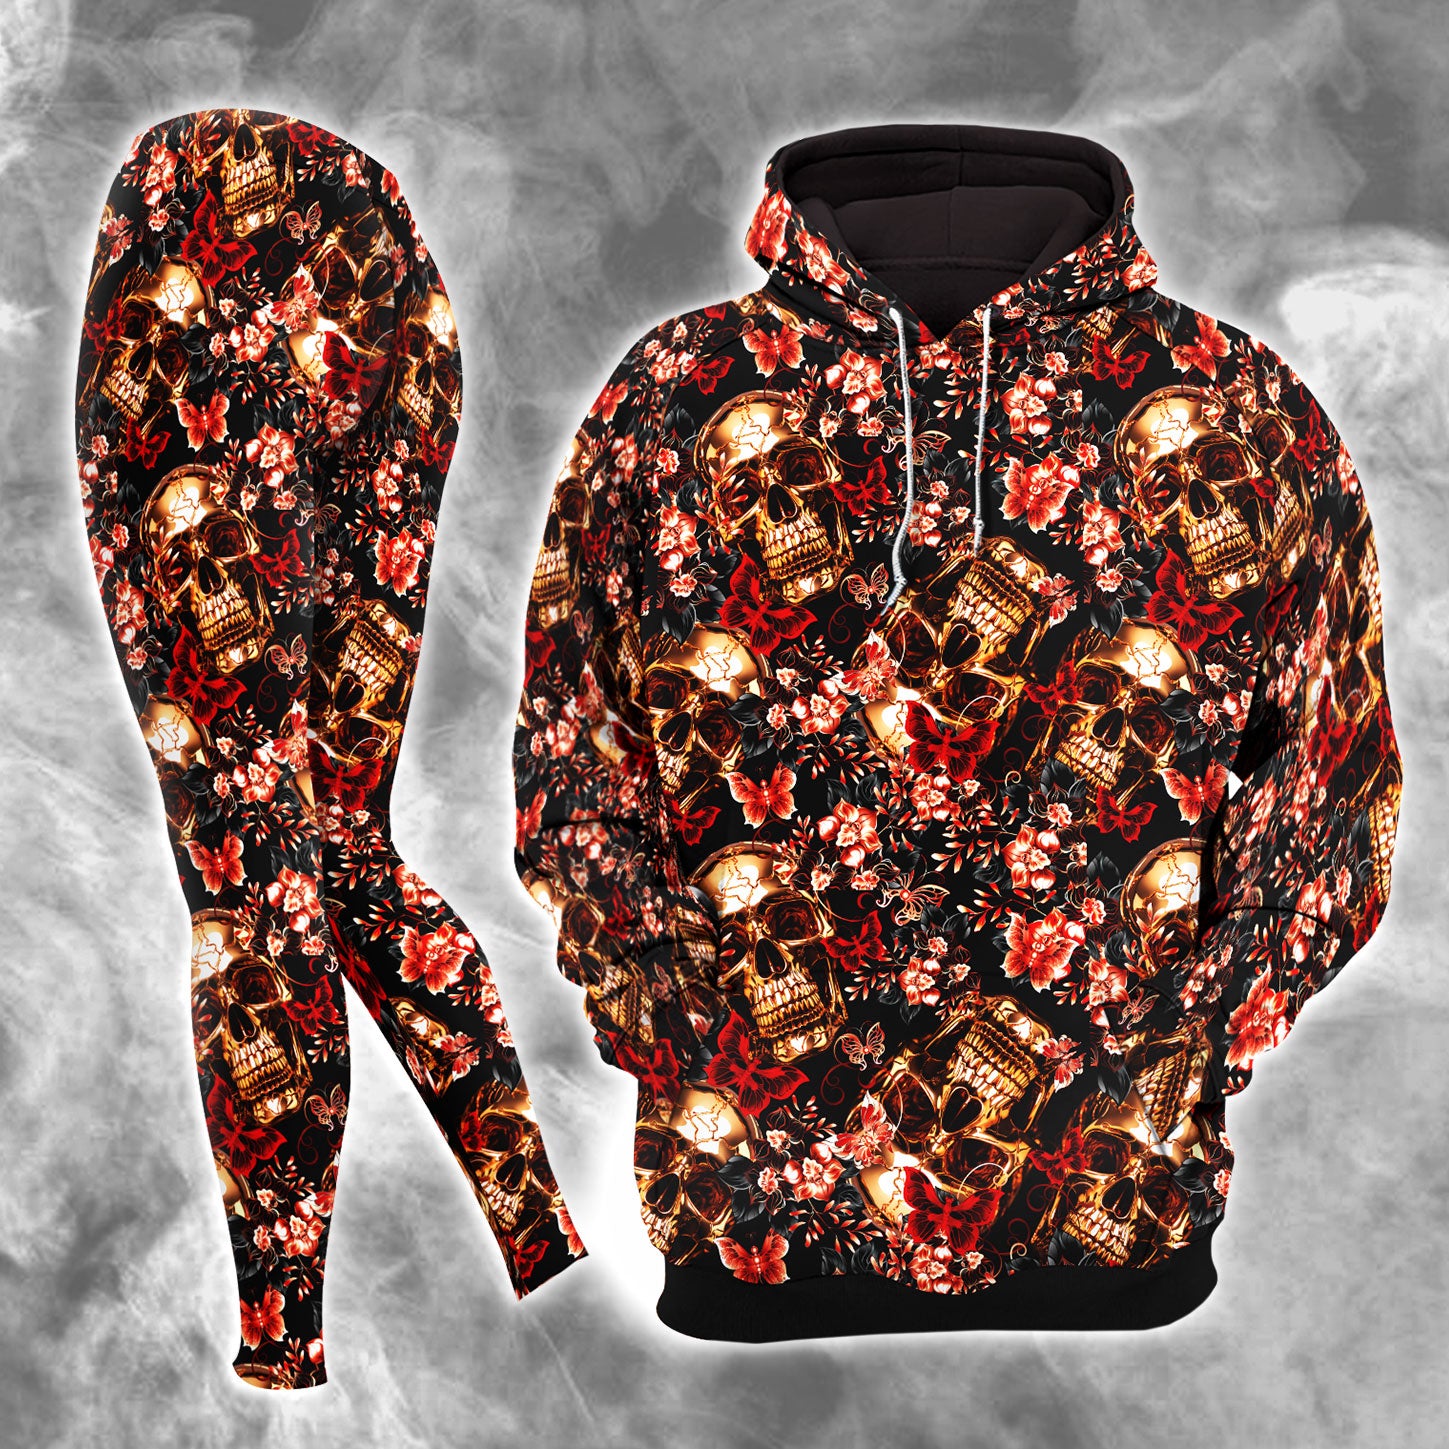 Skull Gold Abstract Art Combo Hoodie and Leggings - Dark and edgy matching set with skull designs for a unique and stylish look.